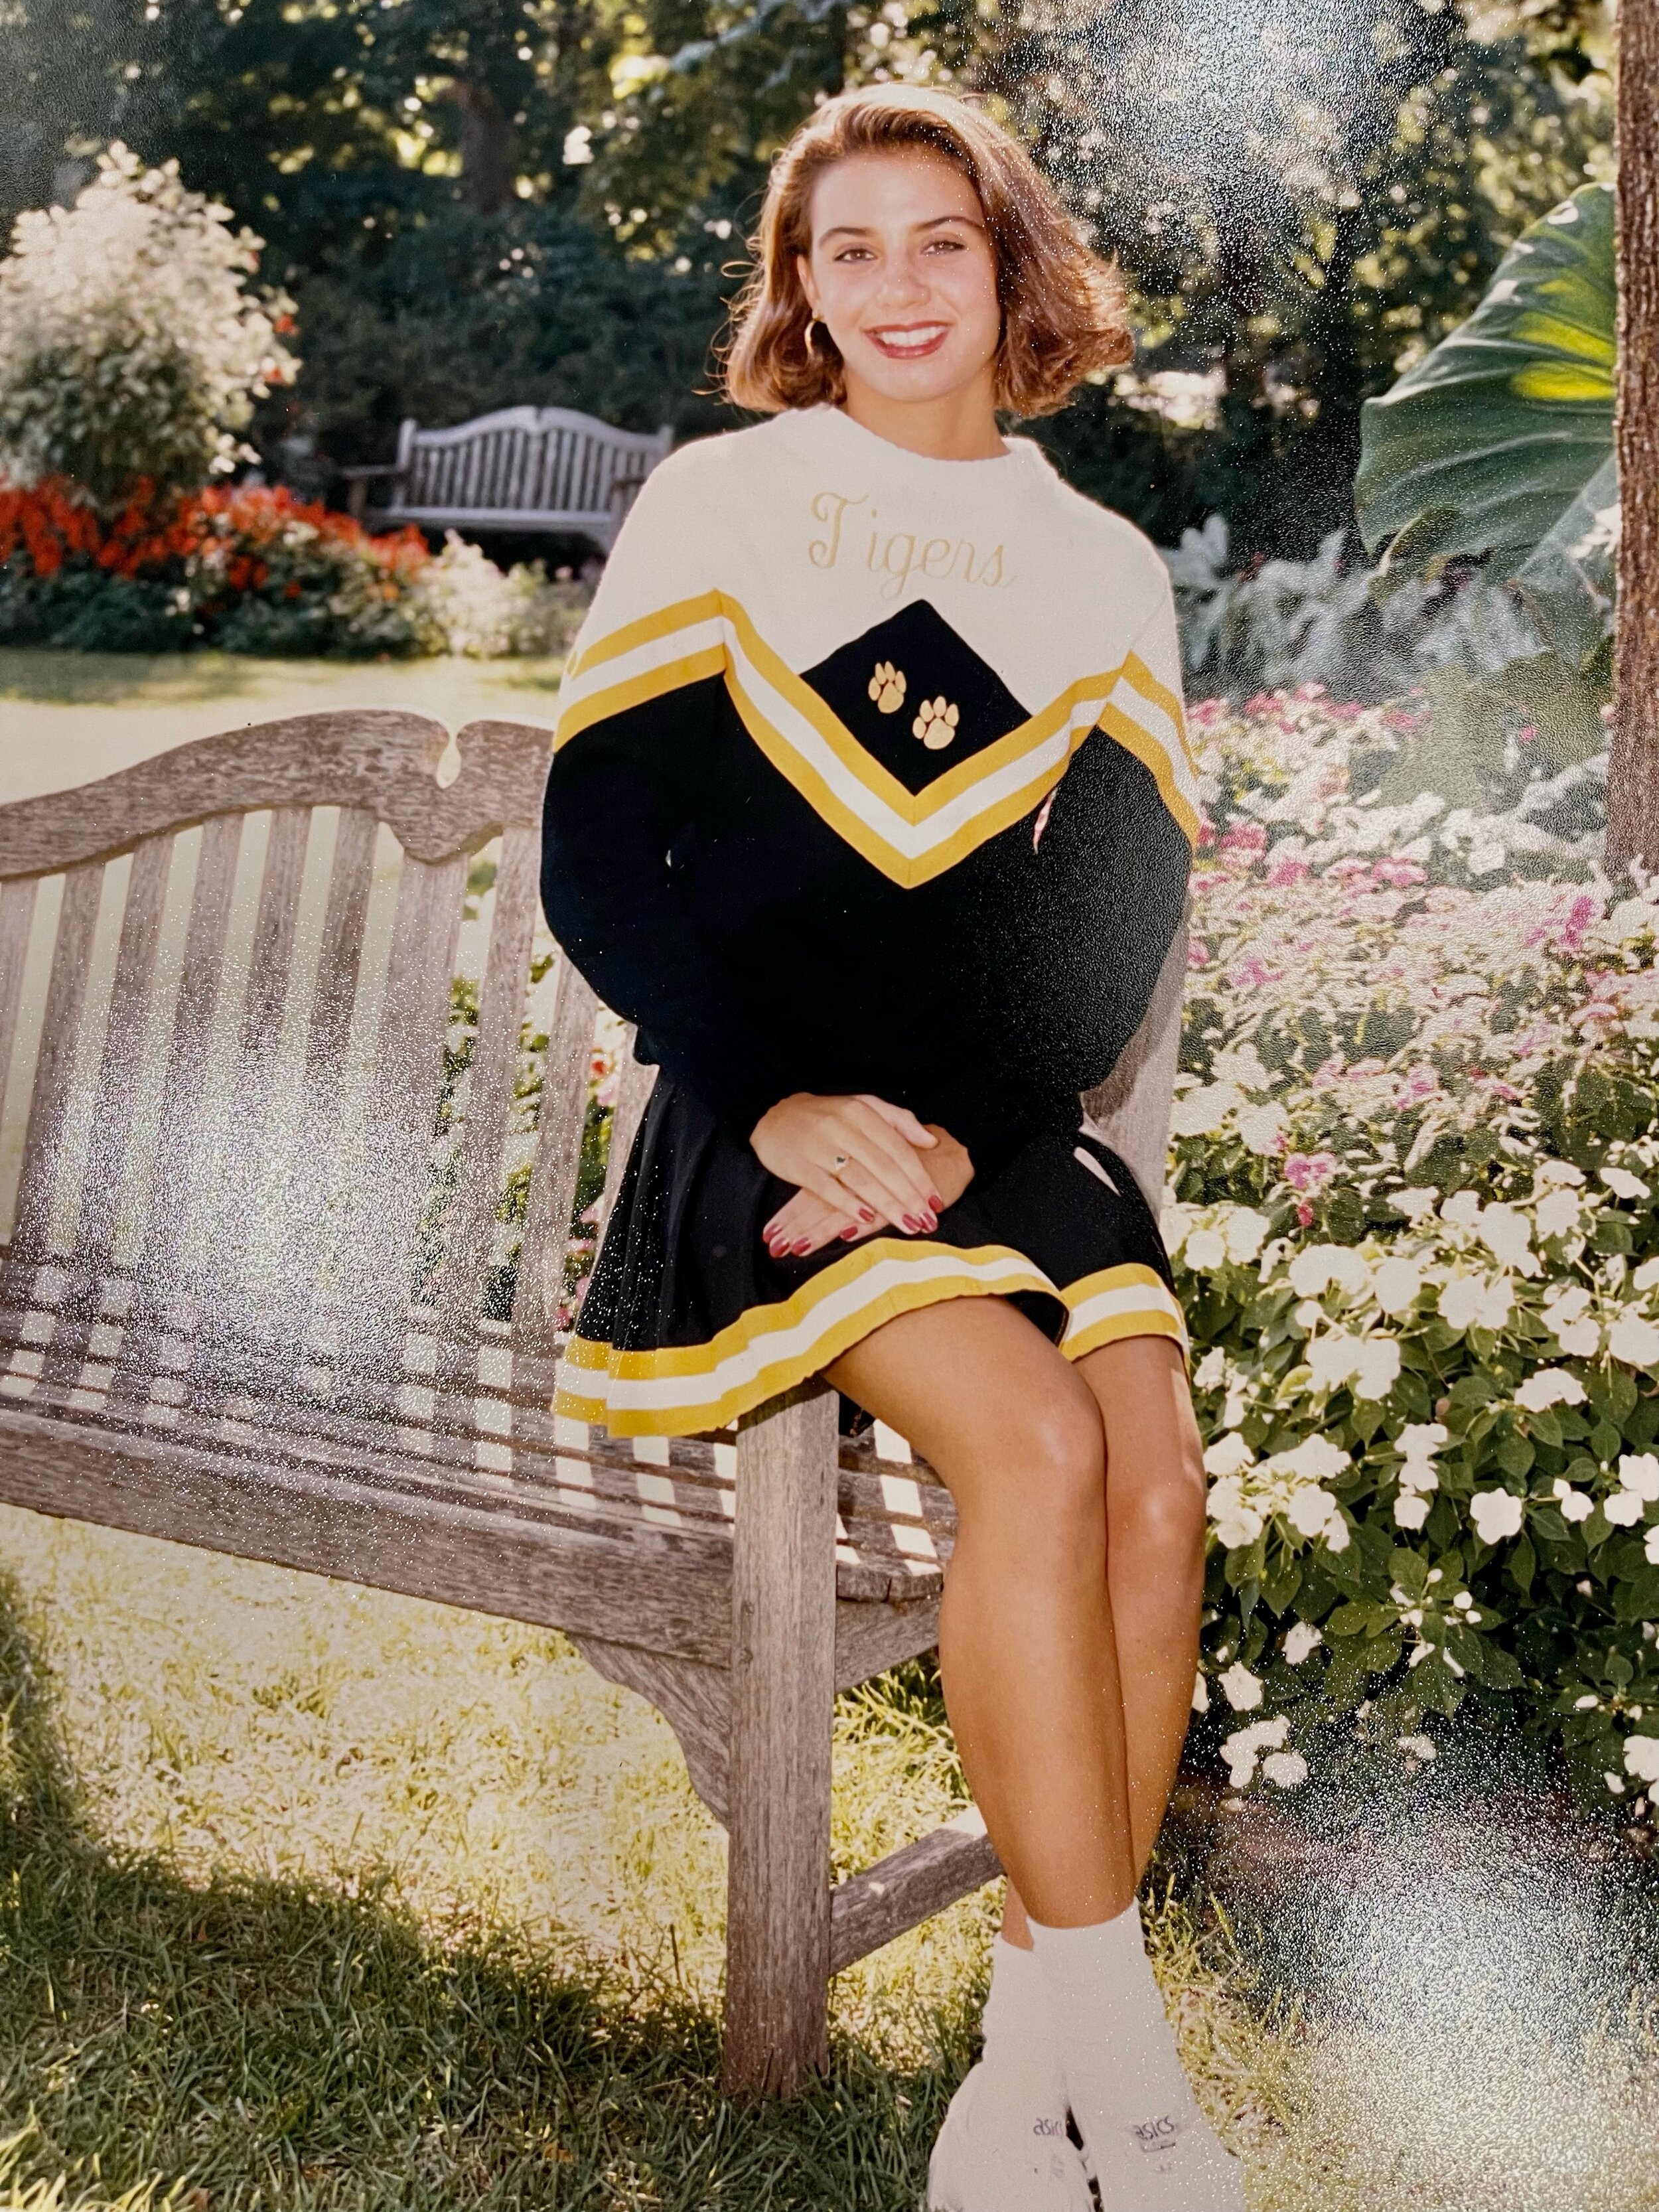 Heather as a high school student. Photo courtesy of Heather Ormand.